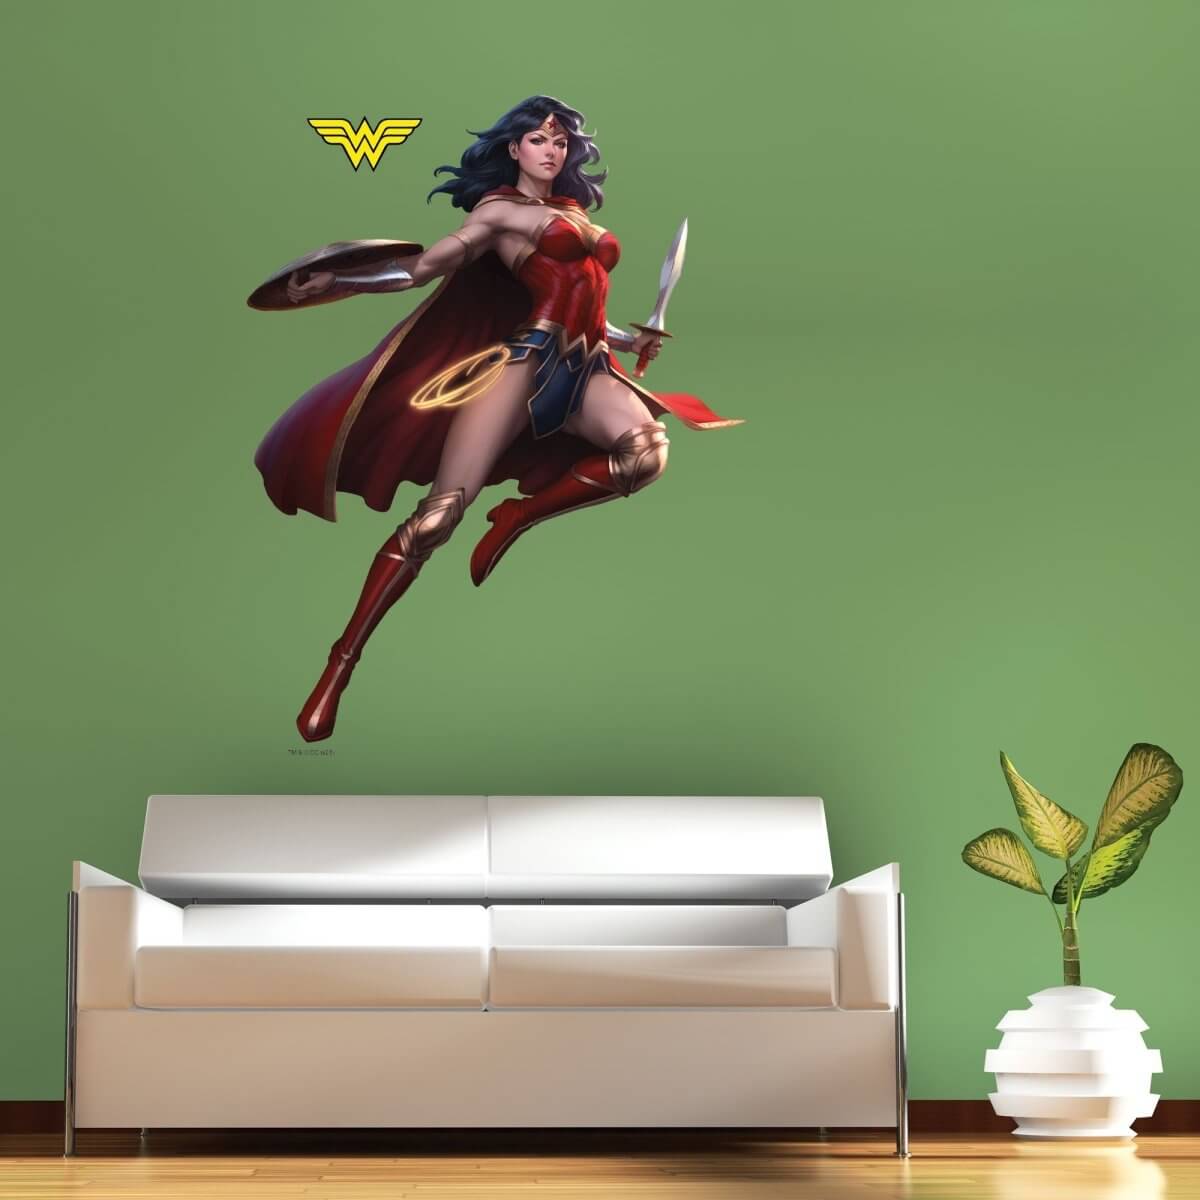 Kismet Decals Wonder Woman: Rebirth #1 Var. Comic Cover Series Officially Licensed Wall Sticker - Easy DIY DC Comics Home, Kids or Adult Bedroom, Office, Living Room Decor Wall Art - Kismet Decals